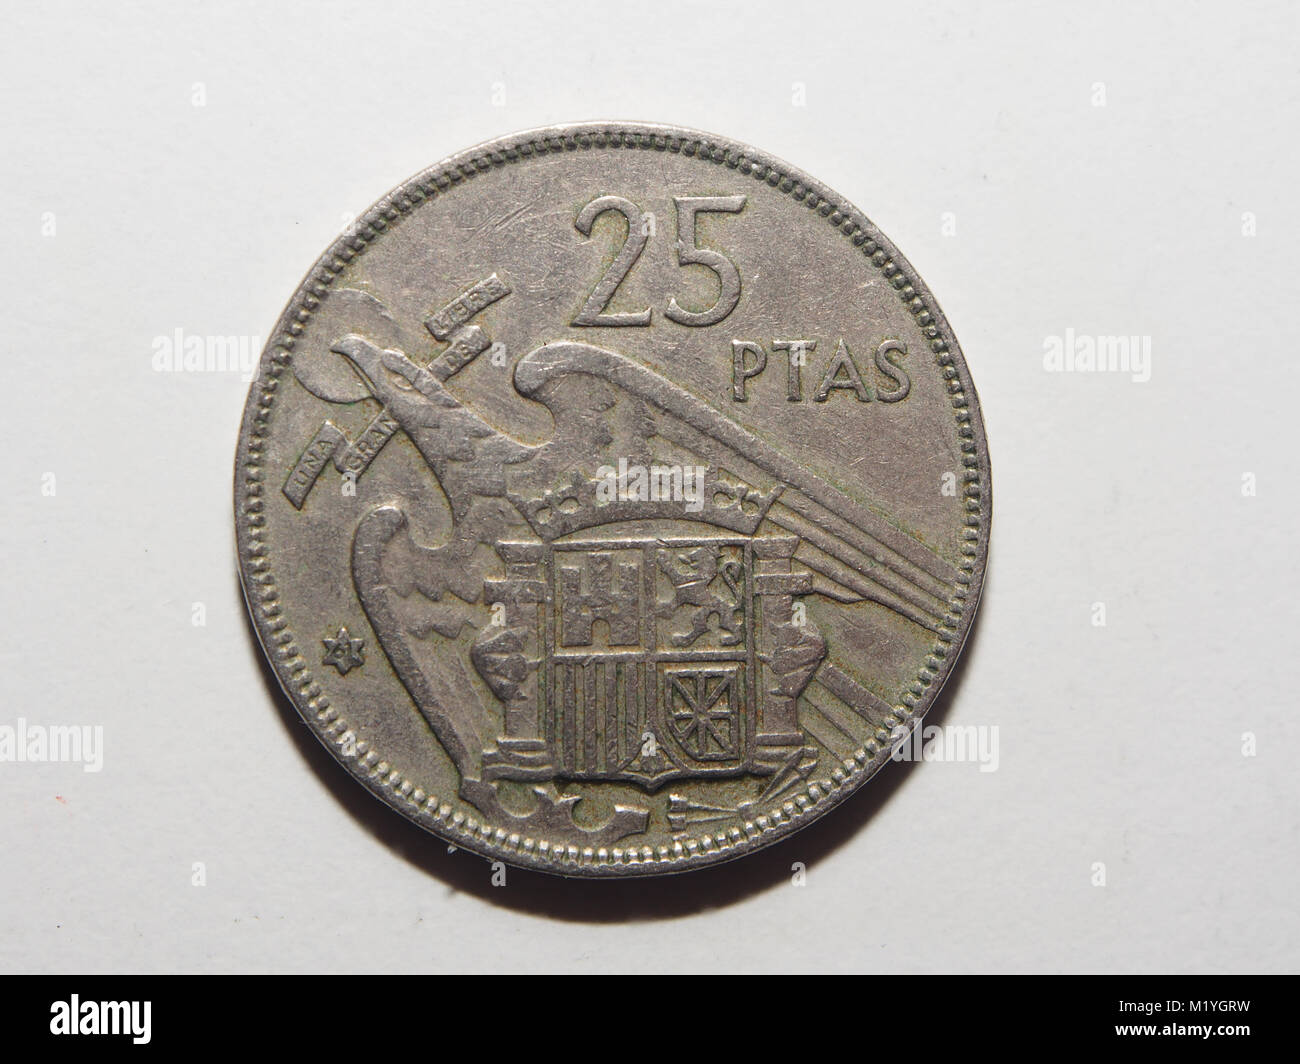 A Spanish  25 Peseta coin featuring the head of General Franco Stock Photo